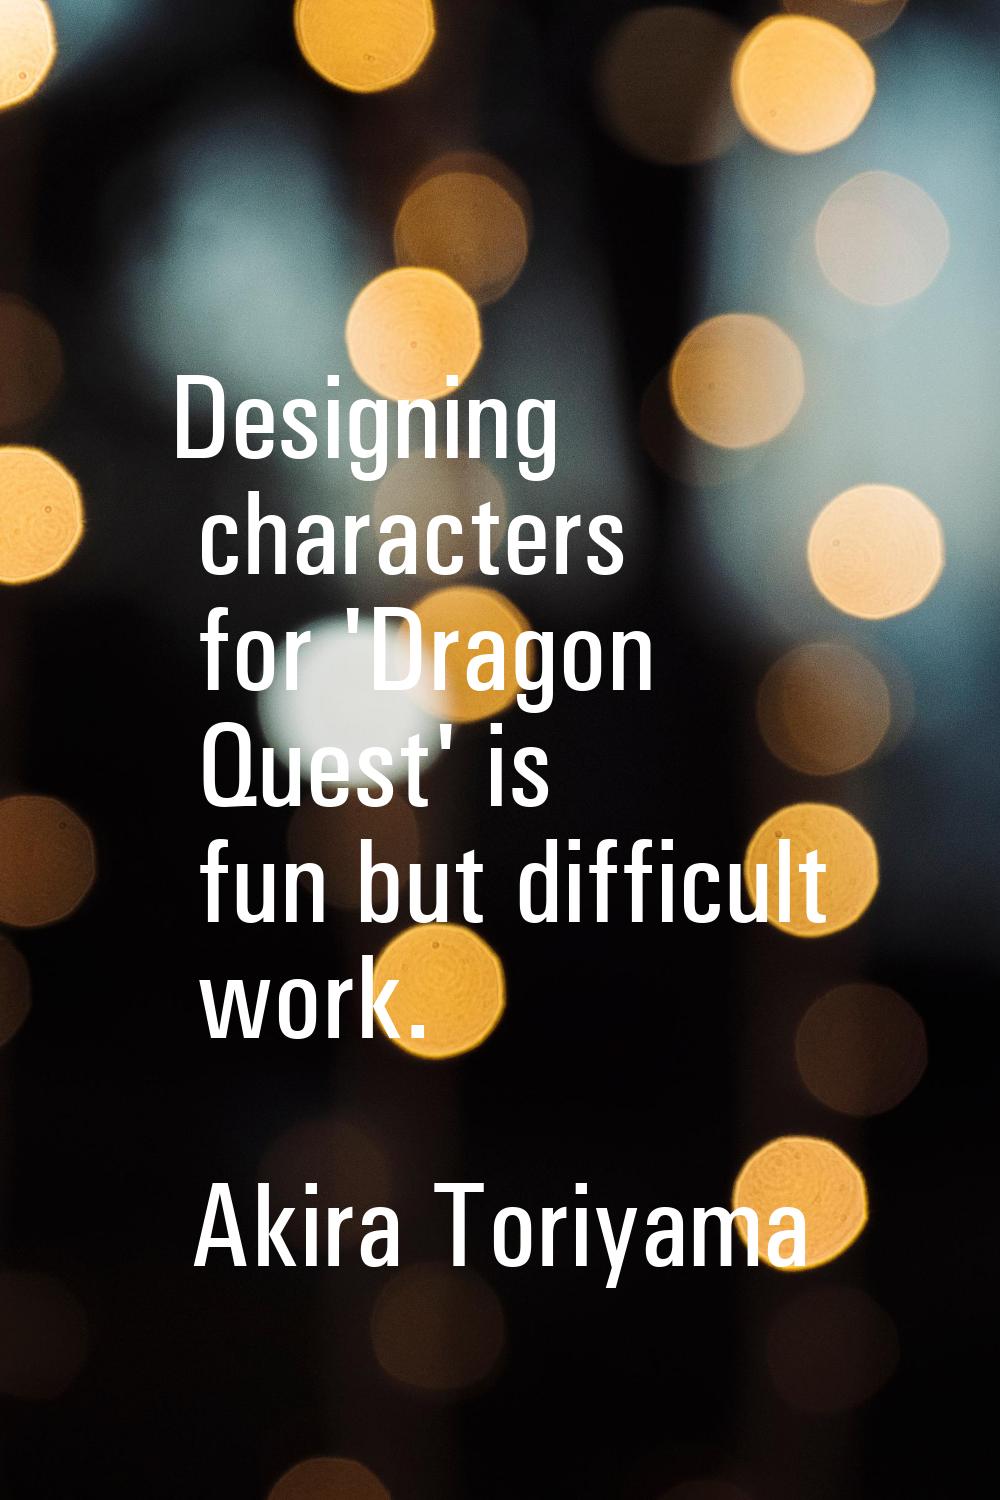 Designing characters for 'Dragon Quest' is fun but difficult work.